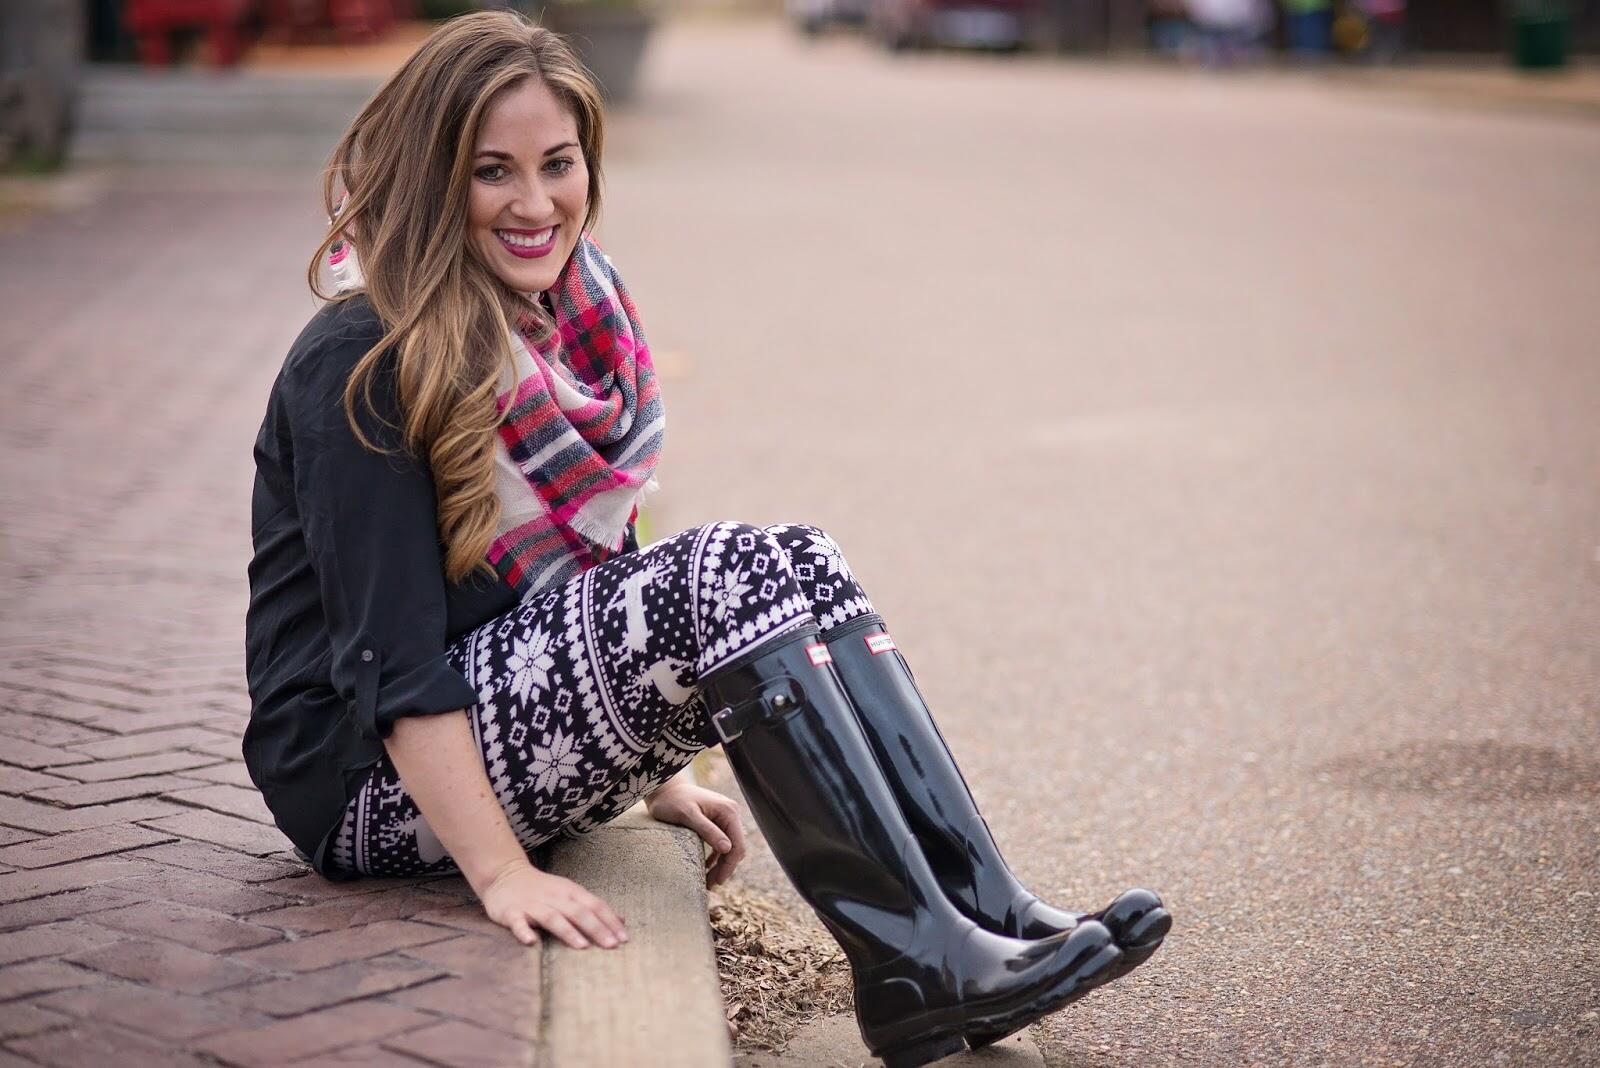 Best Winter Leggings for Women featured by top Memphis fashion blogger, Walking in Memphis in High Heels.